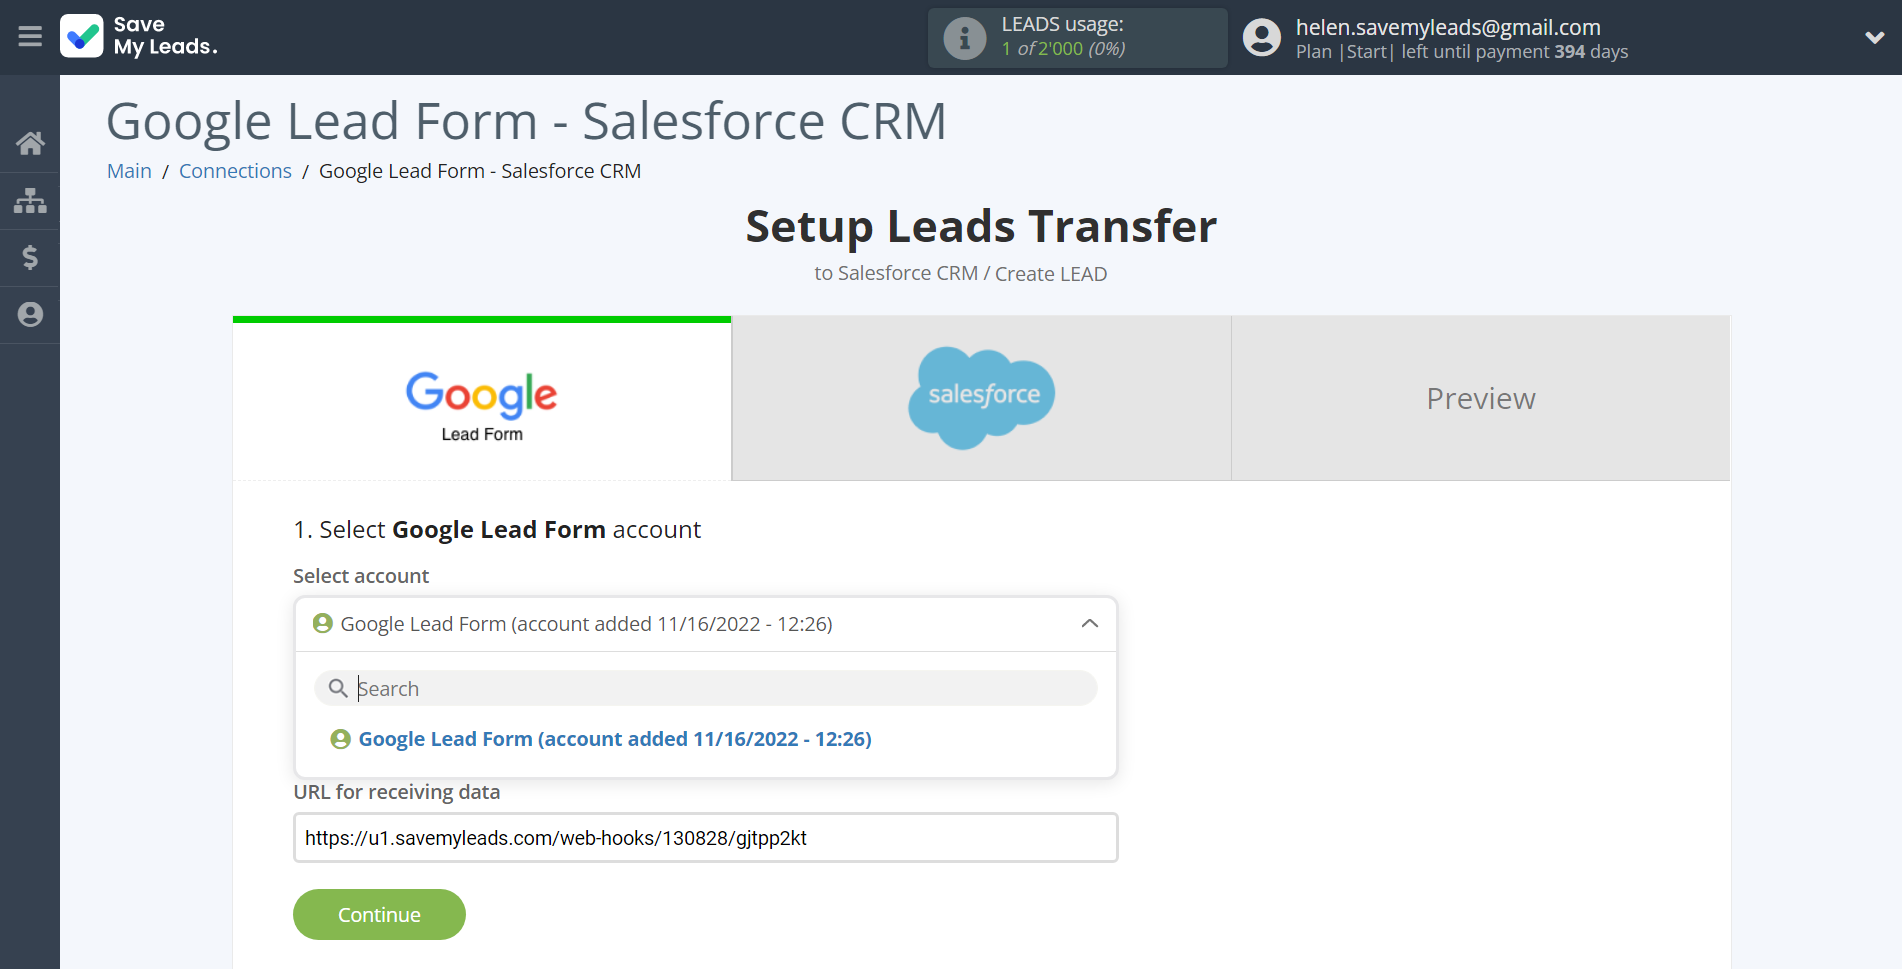 How to Connect Google Lead Form with Salesforce CRM Create Lead | Data Source account selection